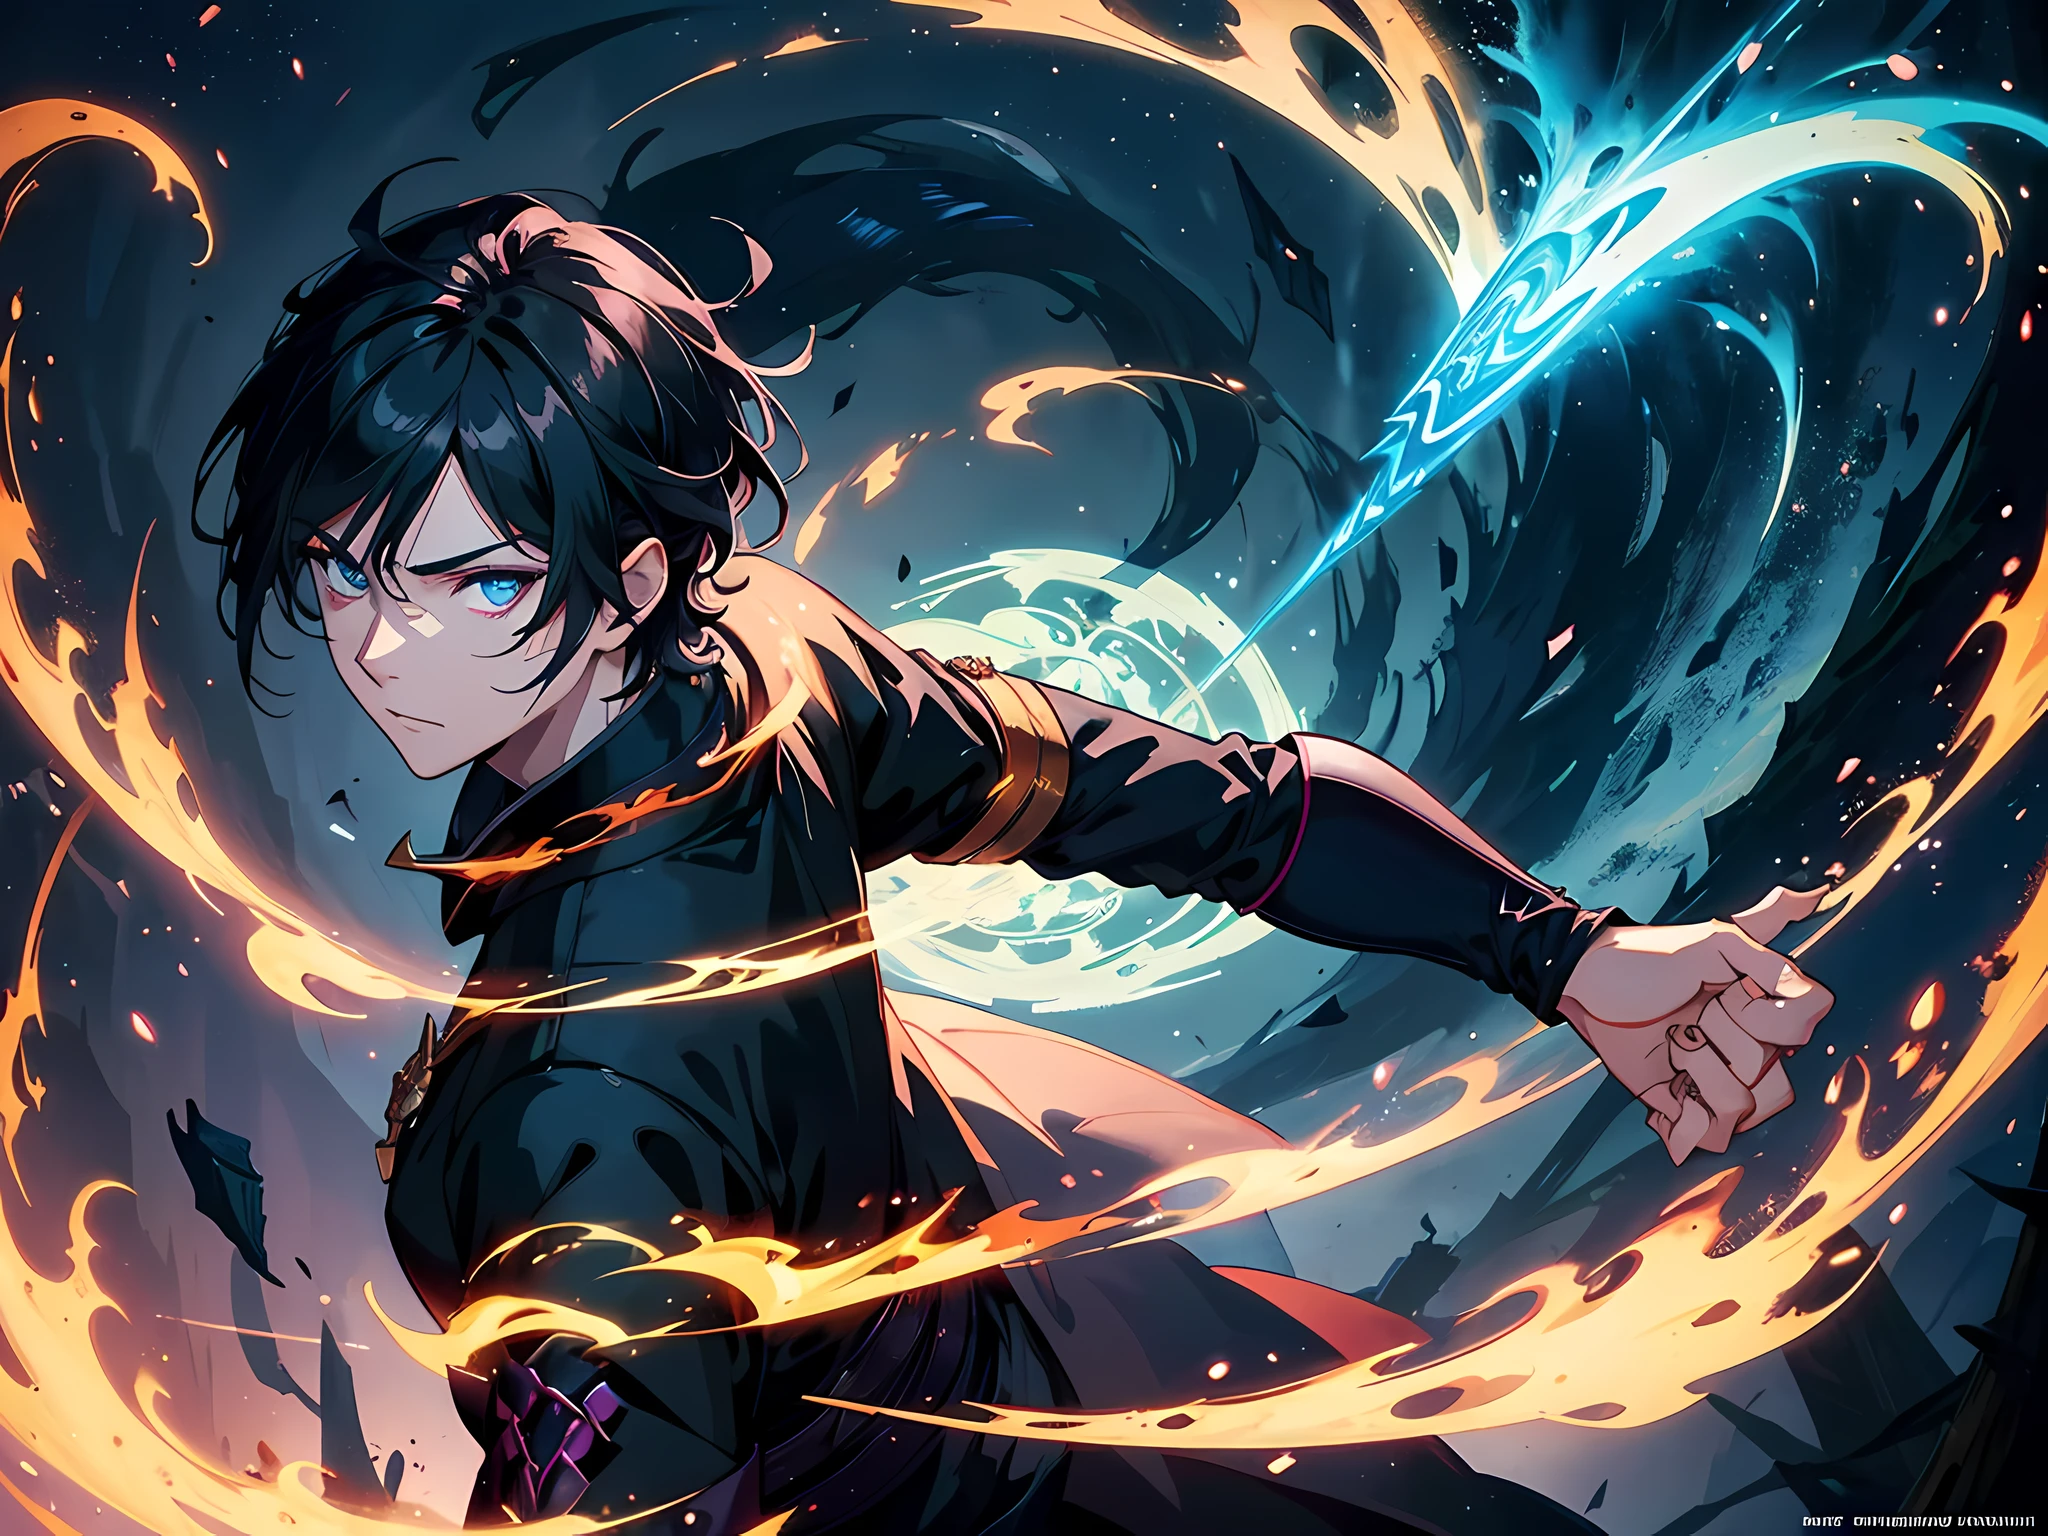 1 man, mage swordsman, beautiful eyes finely detailed, short black hair, wearing aristocrat style outfit, casting a strong spell from his sword, (Masterpiece:1.2), (Best Quality), Detailed, UHD, Cinematic Lighting, sharp focus, (illustration:1.1), intricate, 8k CG, perfect artwork, (half body:0.6), detailed background, witch, magical atmosphere, colorful glowing magic spell in the air, swirling portal, dark magic, (style-swirlmagic:0.8), floating particles, dark sinister forest background, updraft, backlighting,